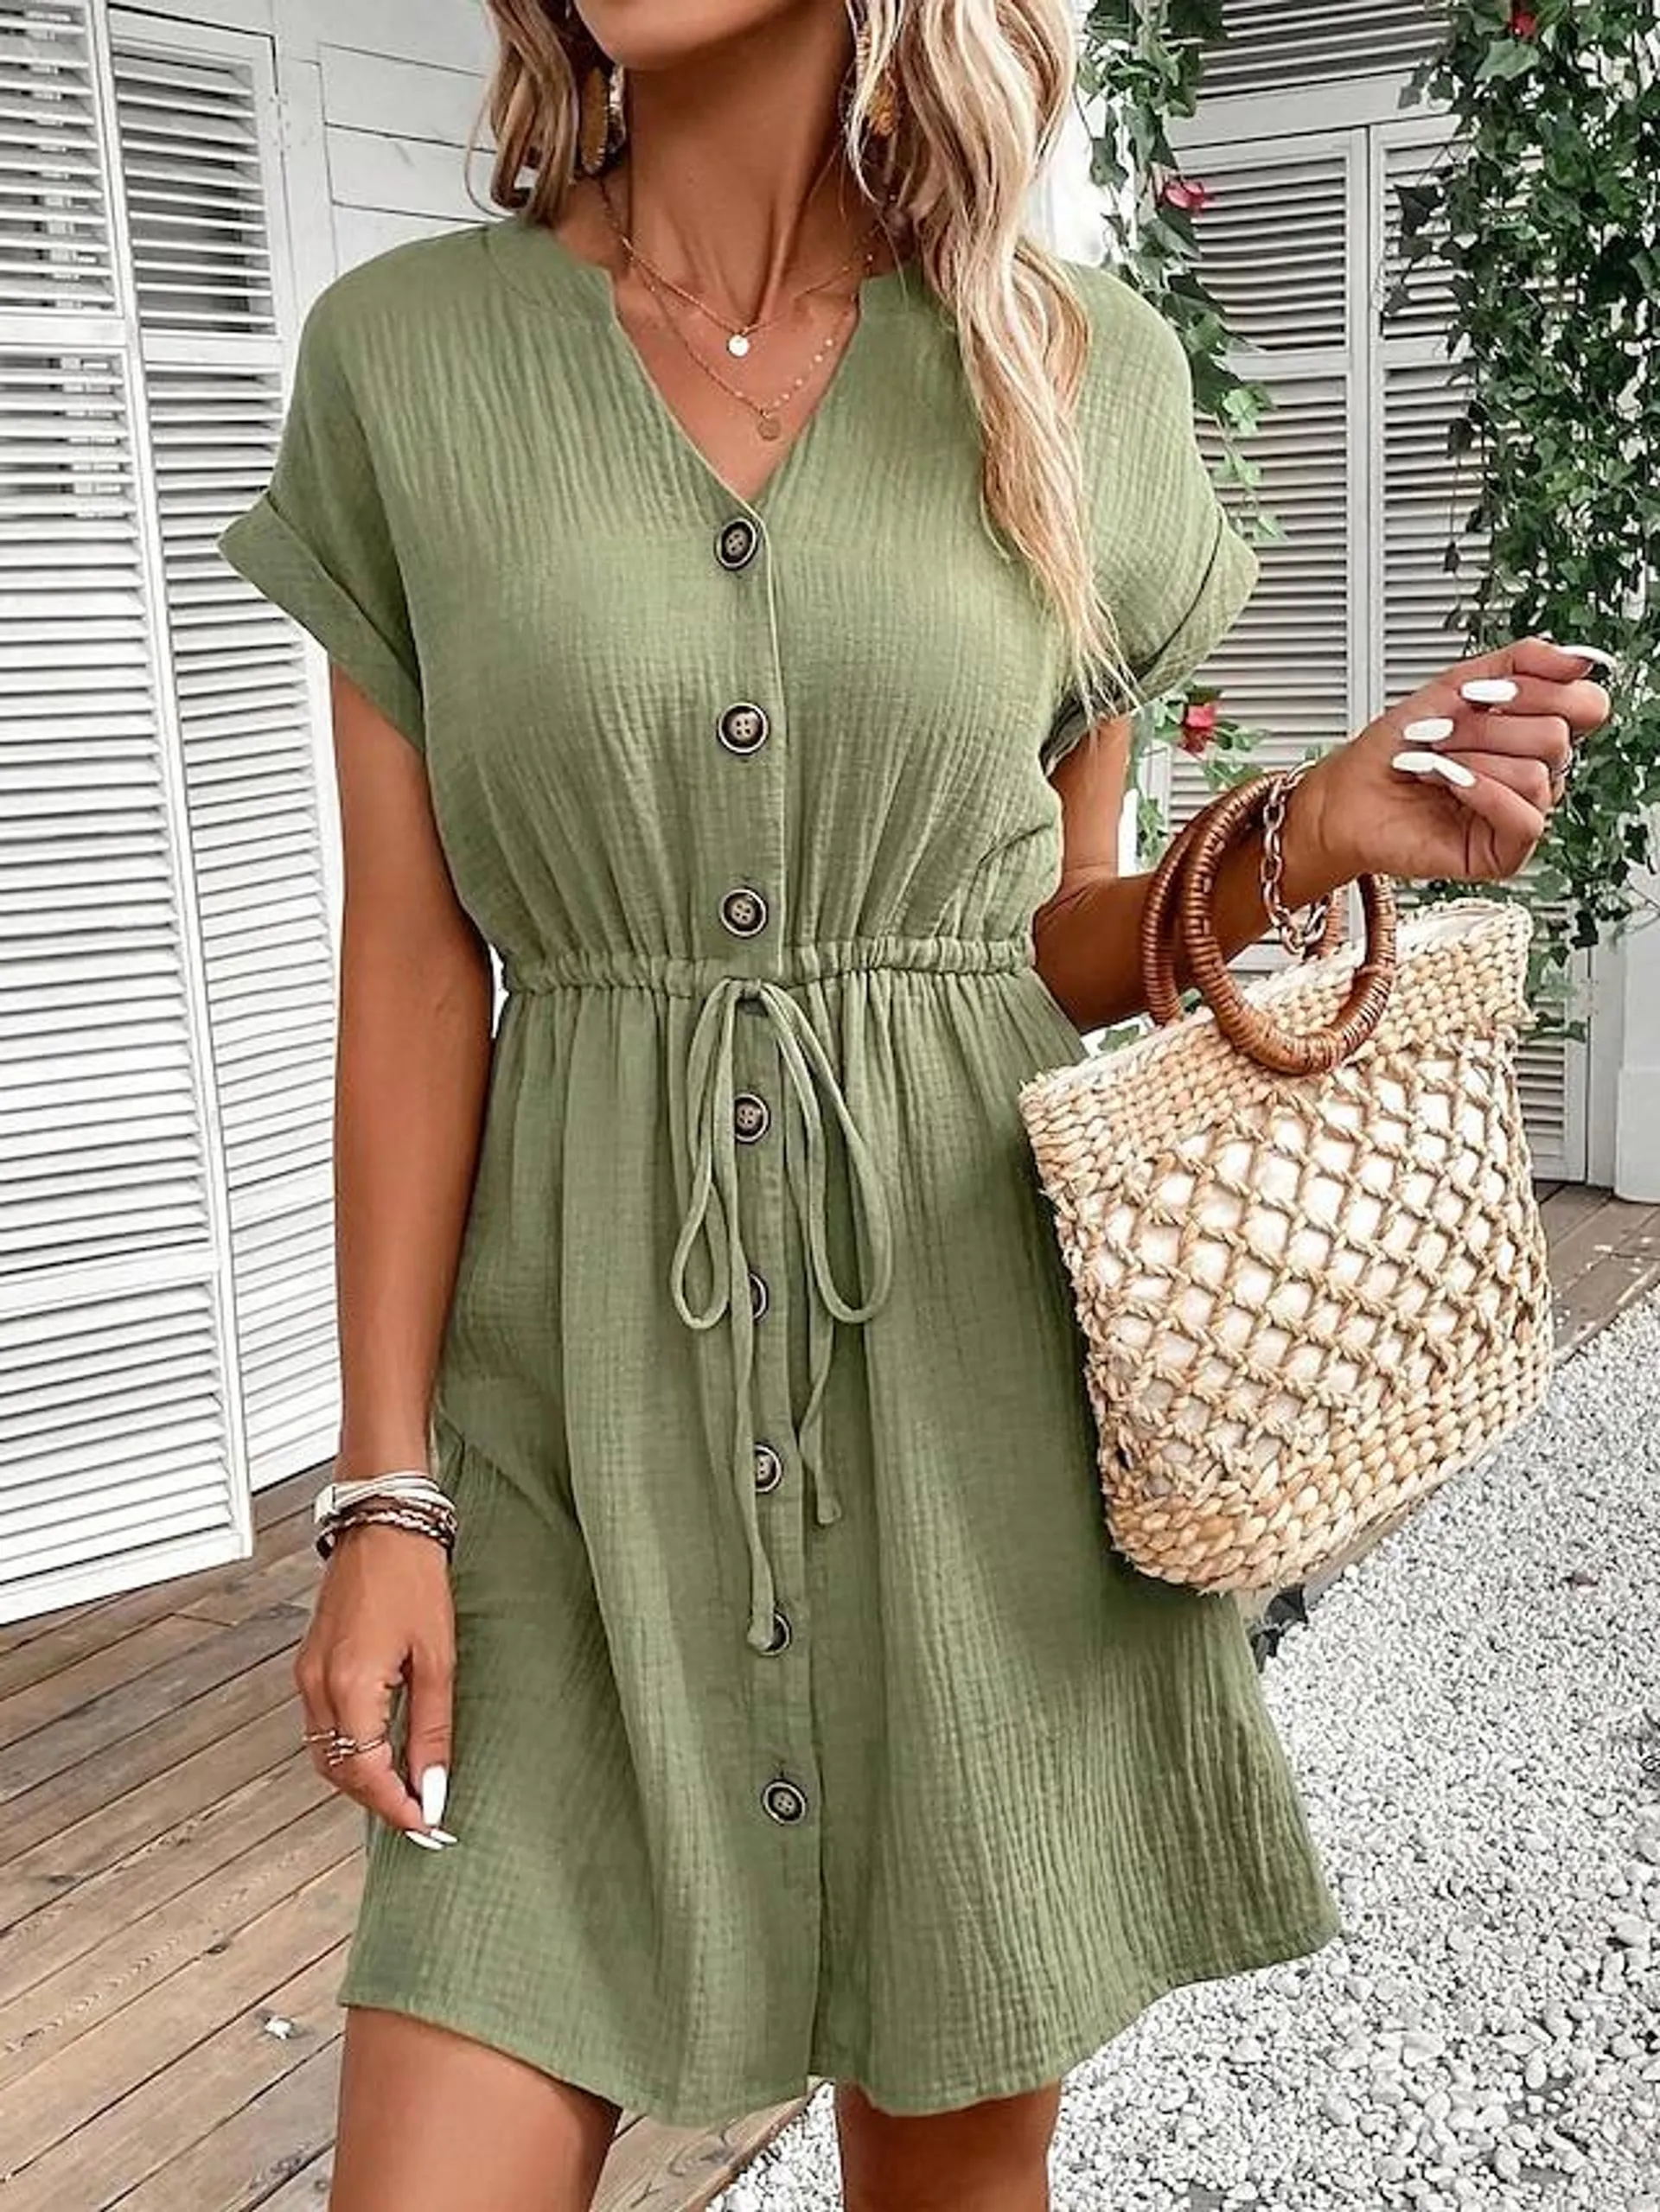 Women's Casual Dress Mini Dress Lace Button Casual V Neck Short Sleeve Green Color